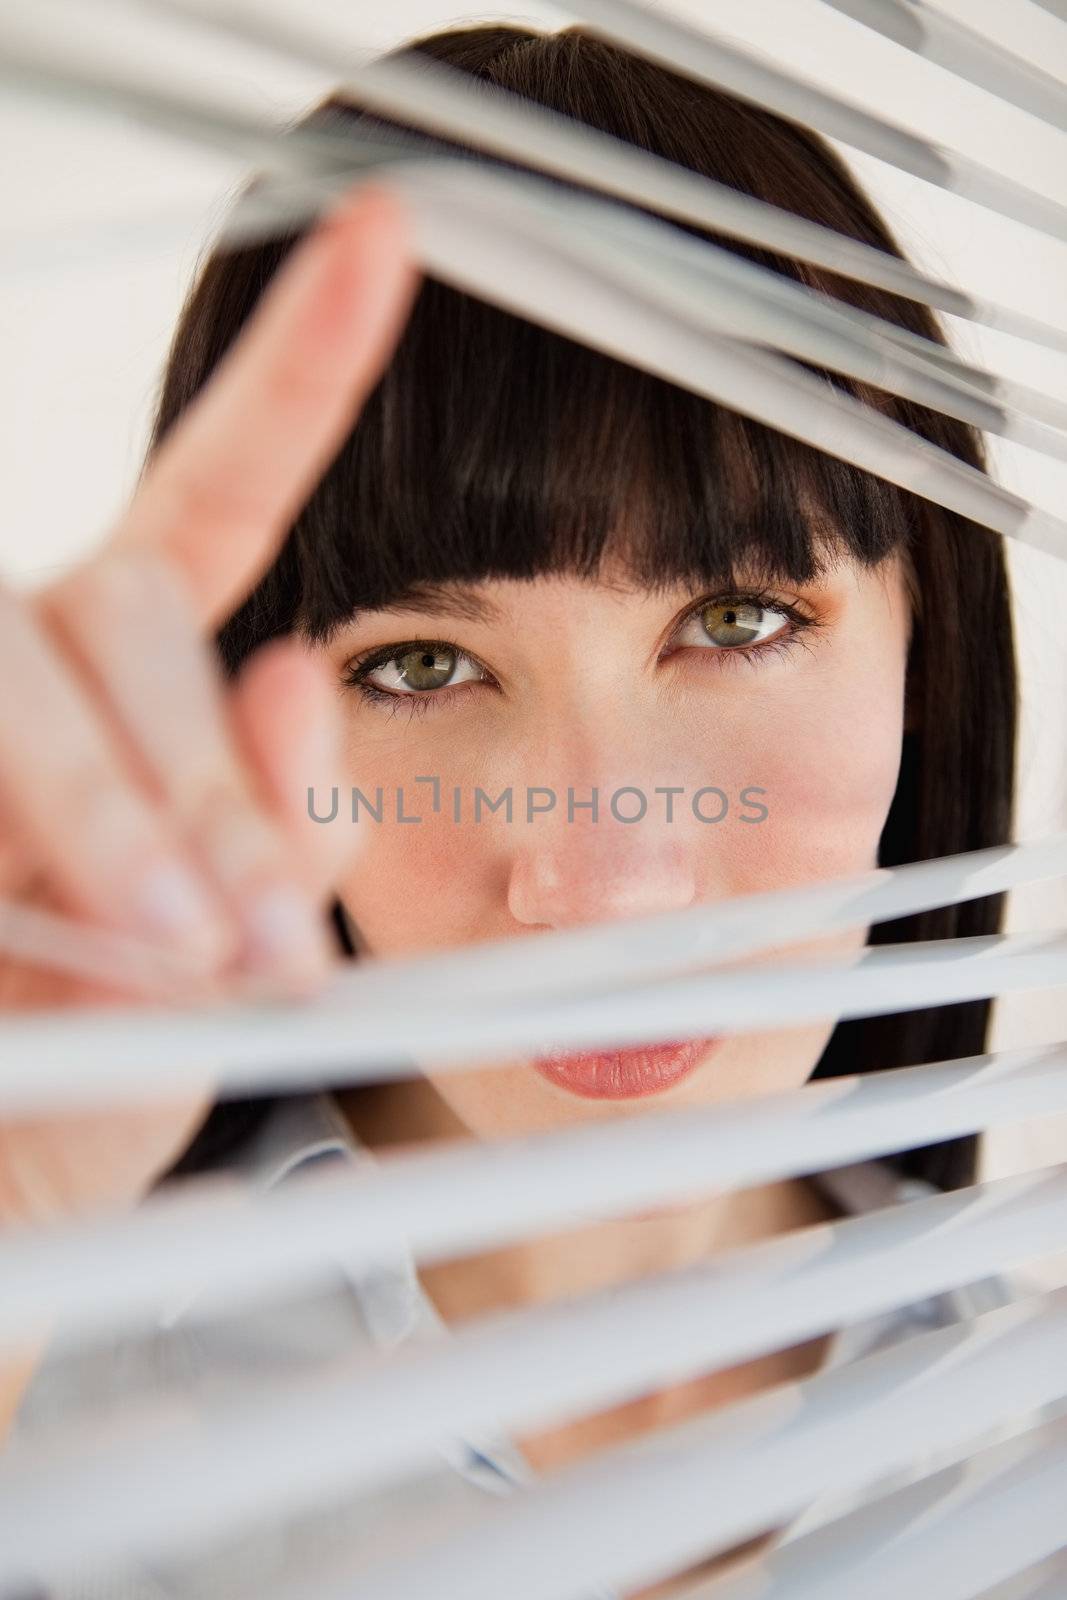 A woman opens her blinds to look through the window into the camera